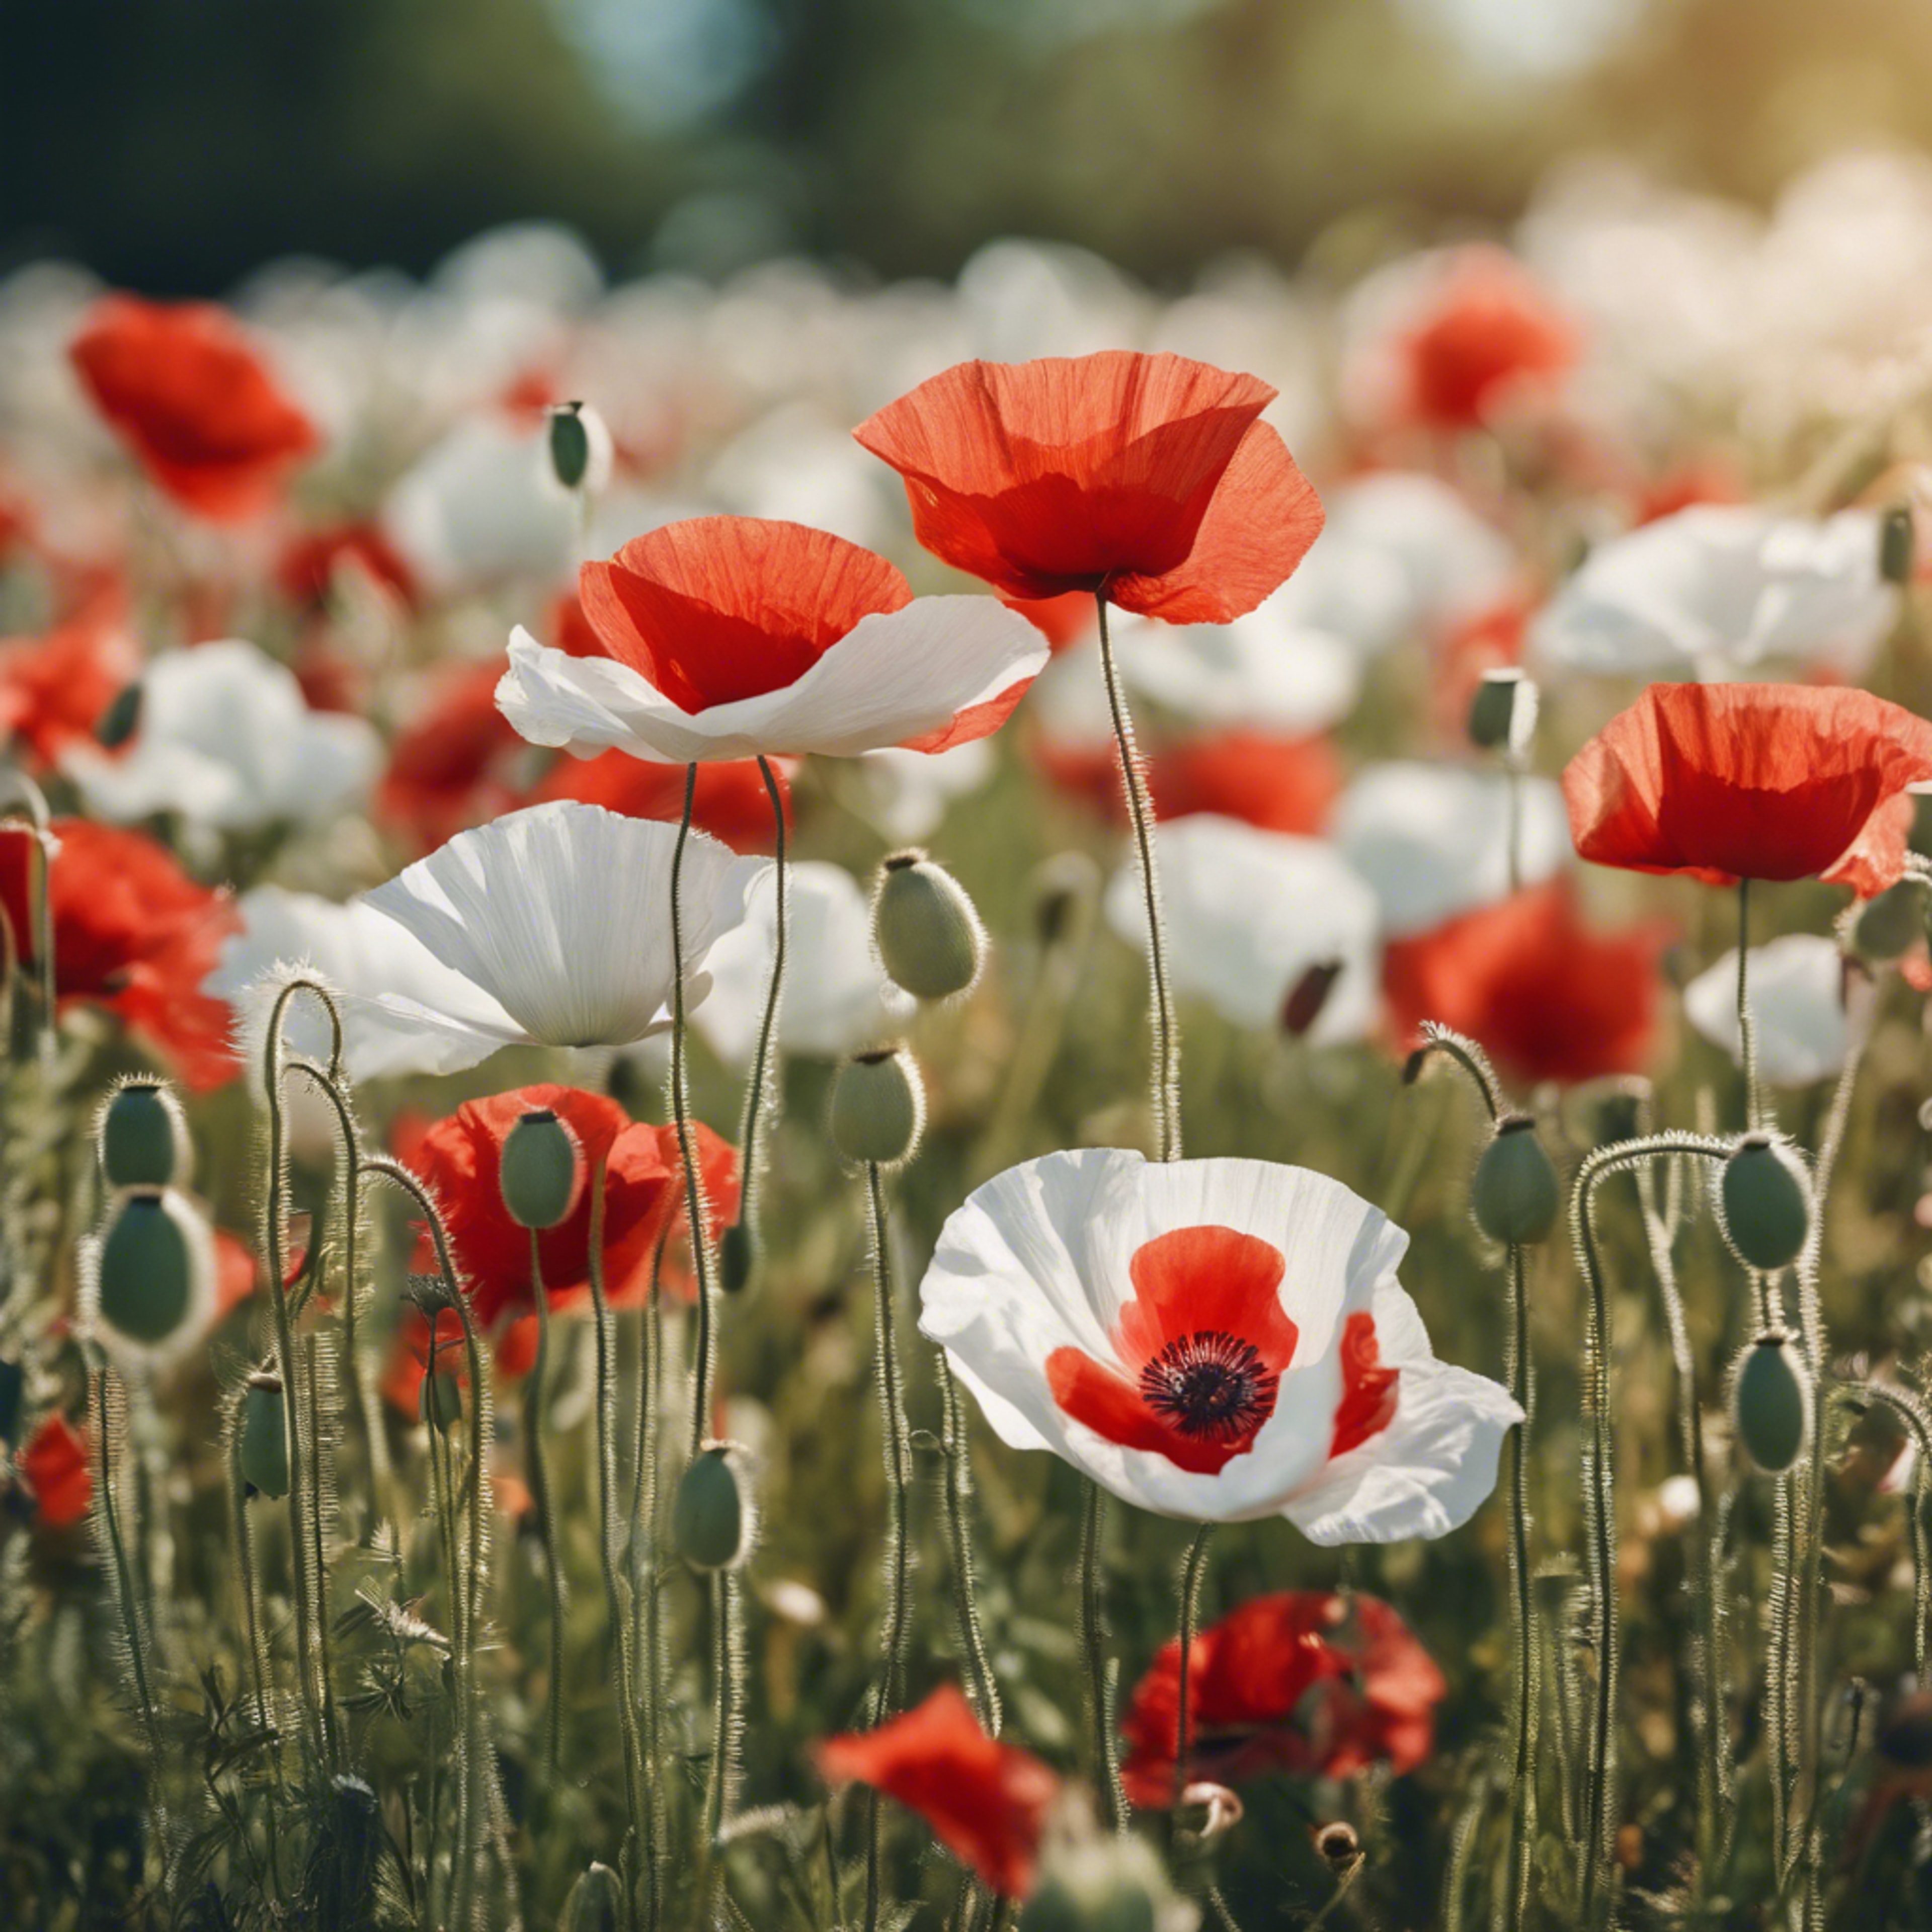 A patch of vibrant red and white poppy flowers in a summer meadow. Tapeta[6e8905720b3f496680eb]